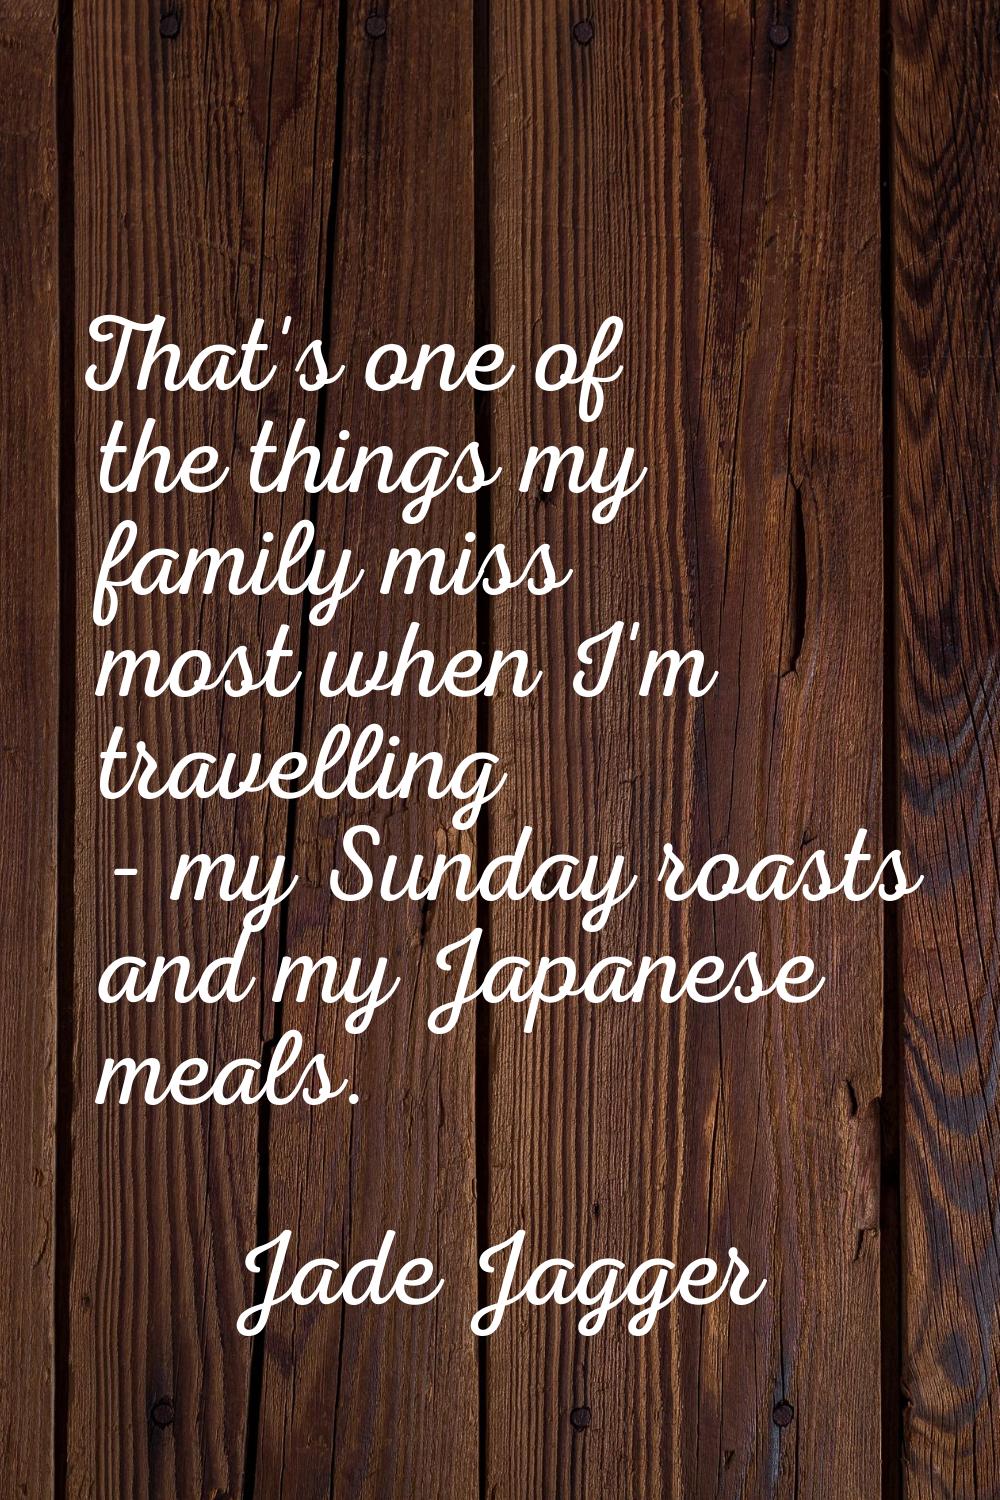 That's one of the things my family miss most when I'm travelling - my Sunday roasts and my Japanese